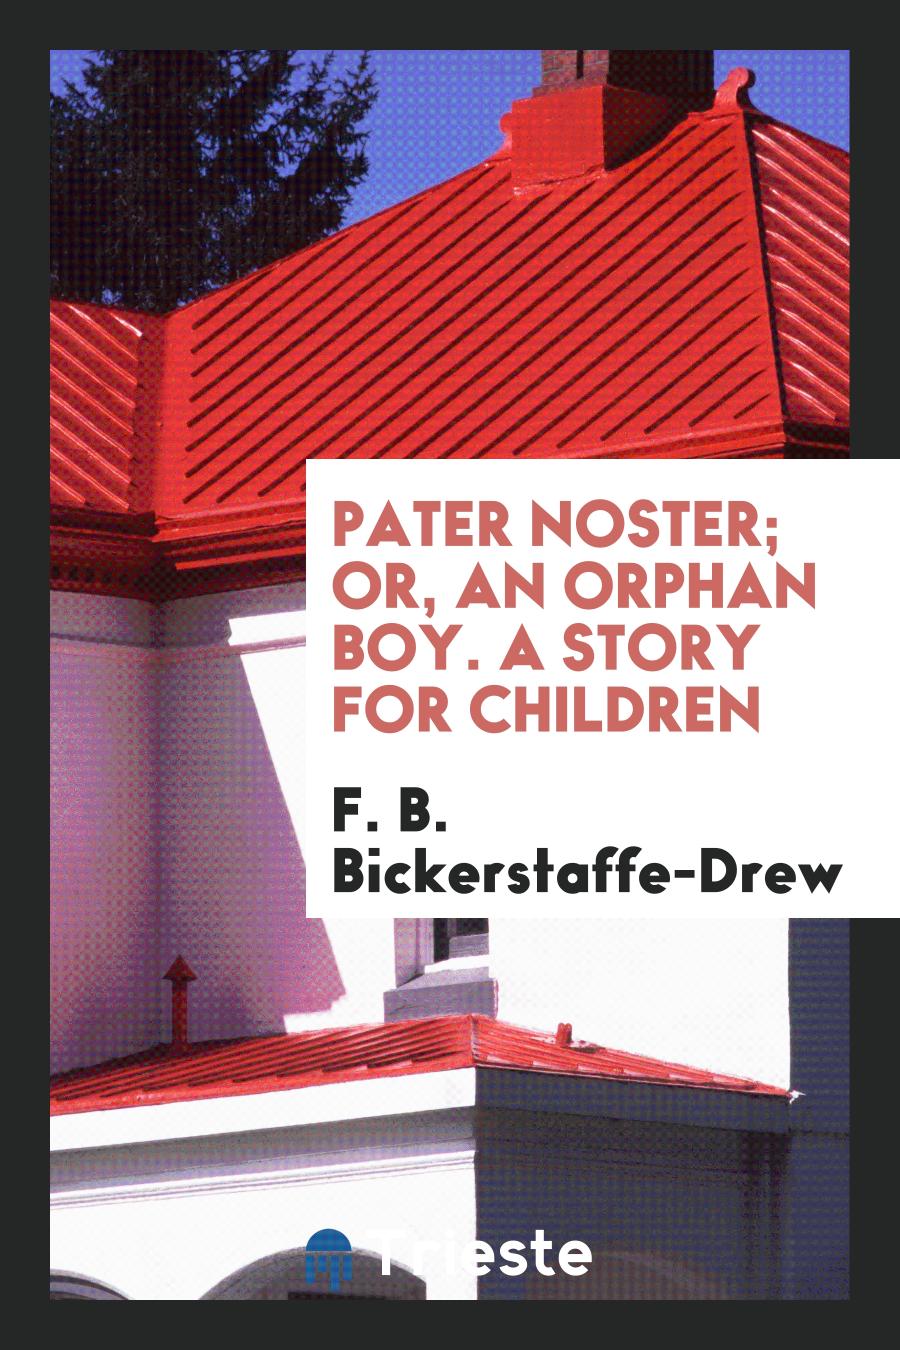 Pater noster; Or, An Orphan Boy. A Story for Children